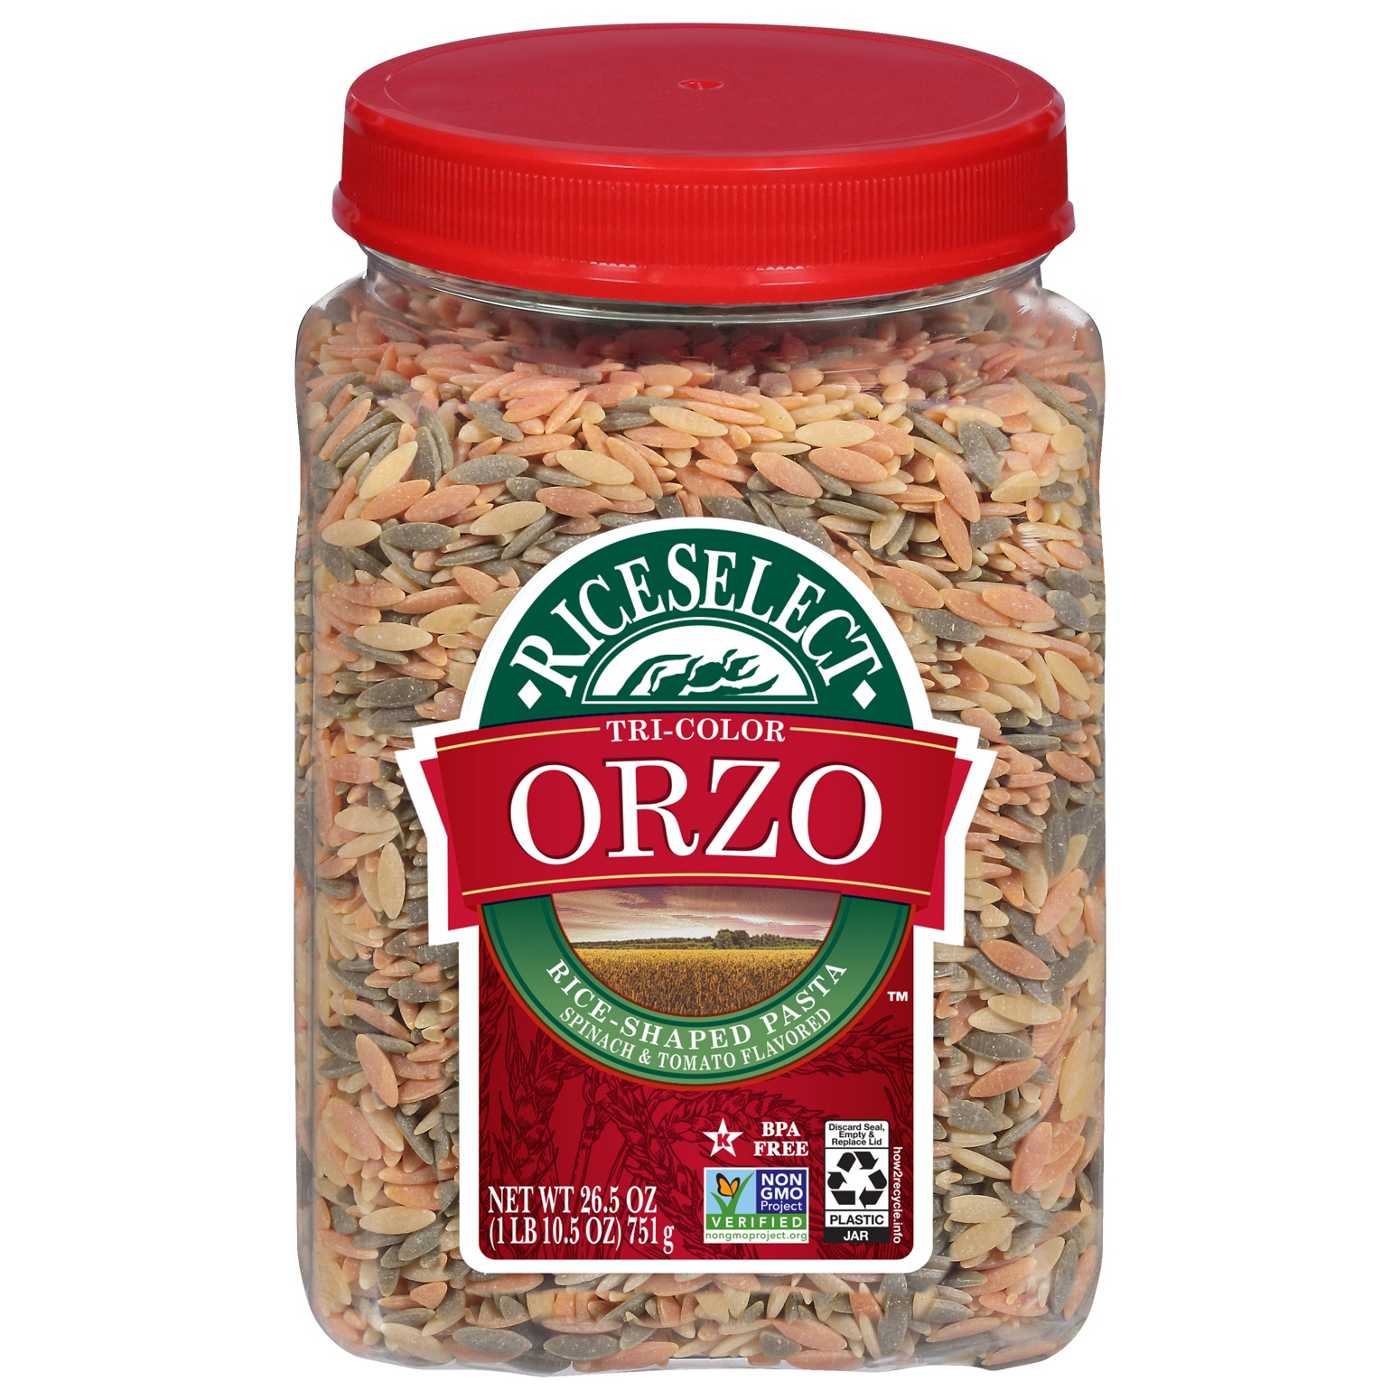 RiceSelect Tri-Color Orzo; image 1 of 6